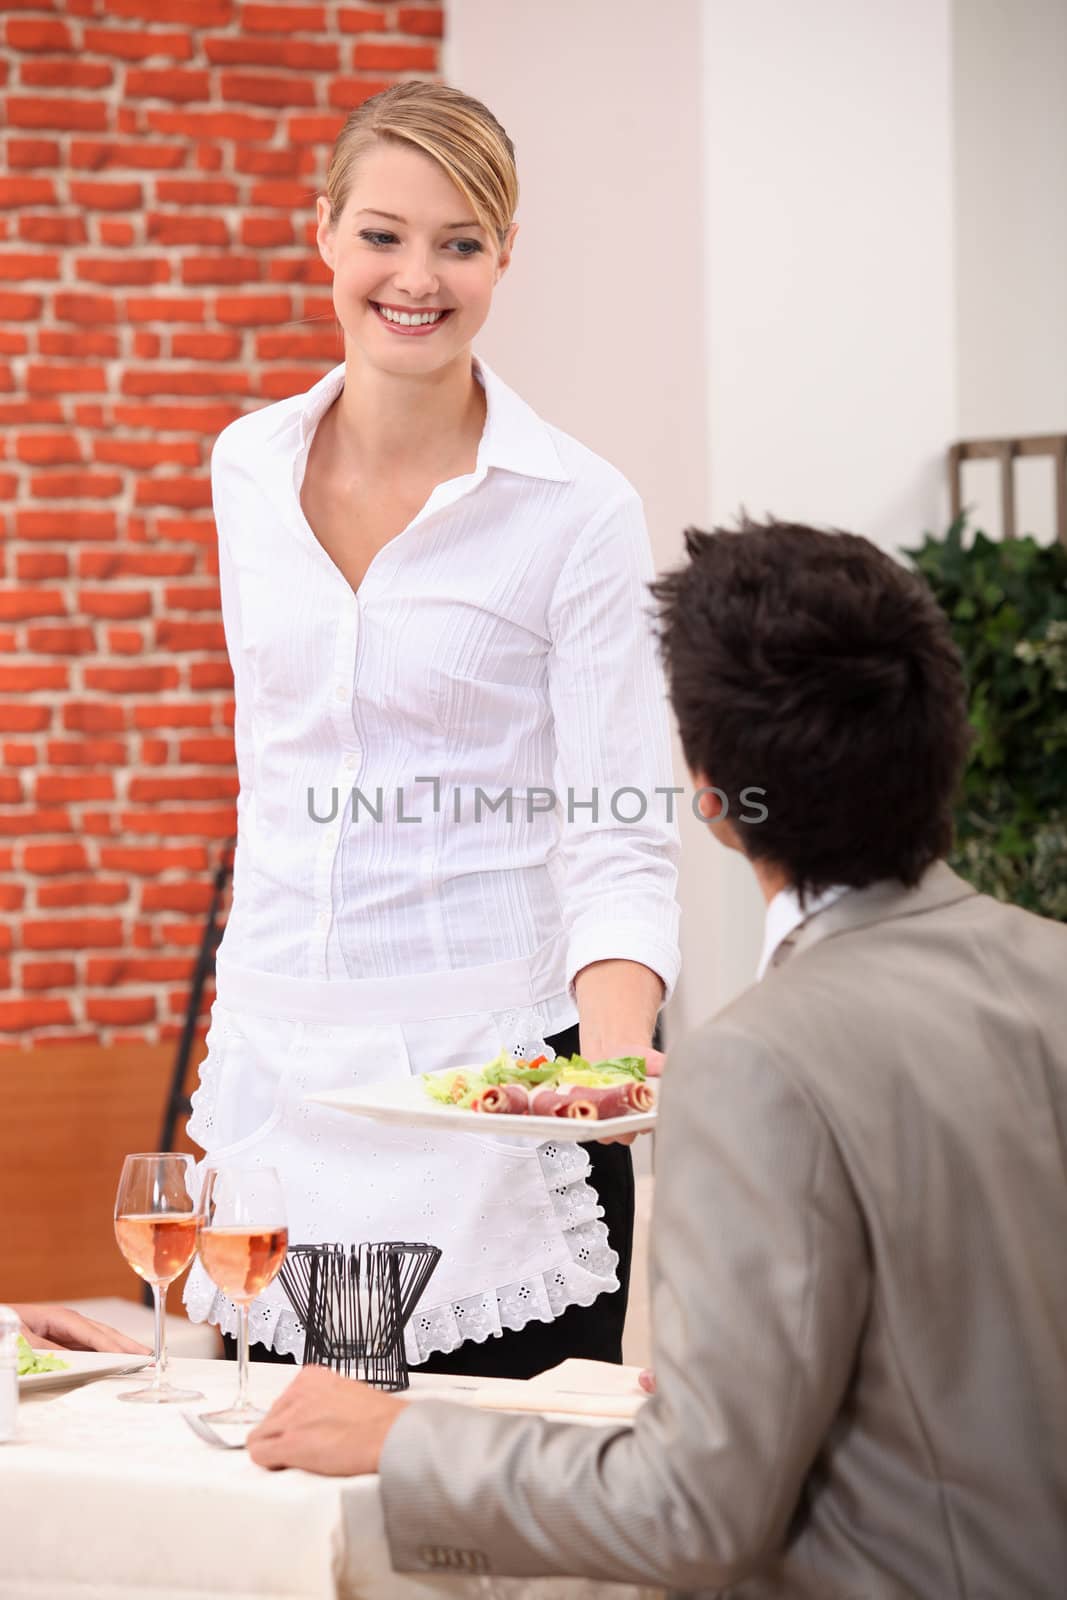 Waitress handing meal to customer by phovoir